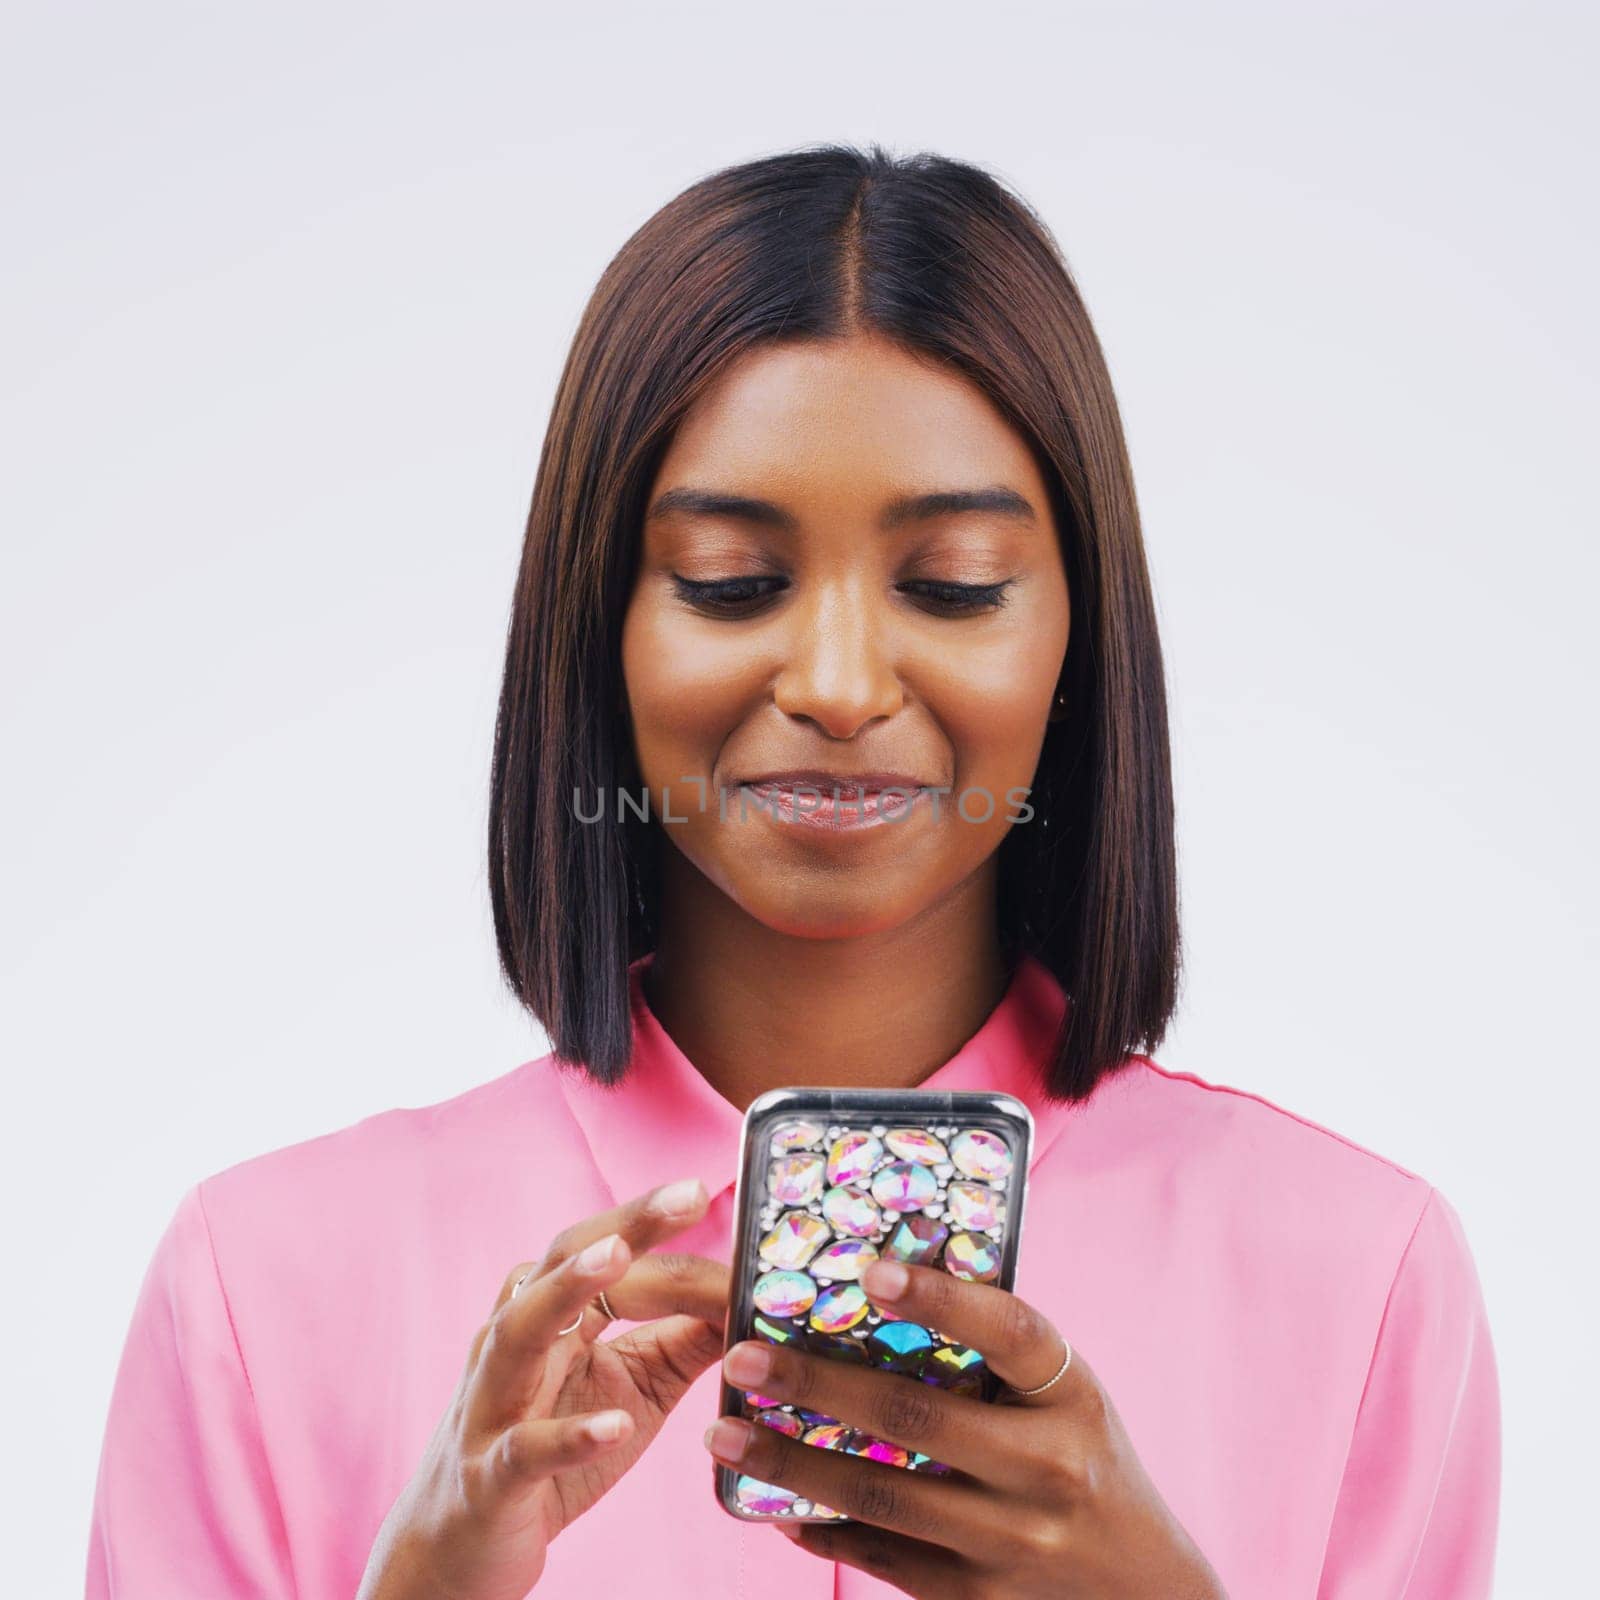 Phone, communication and face of woman in studio with smile for social media, internet and online chat. Mockup, white background and female person on smartphone for website, mobile app and texting.